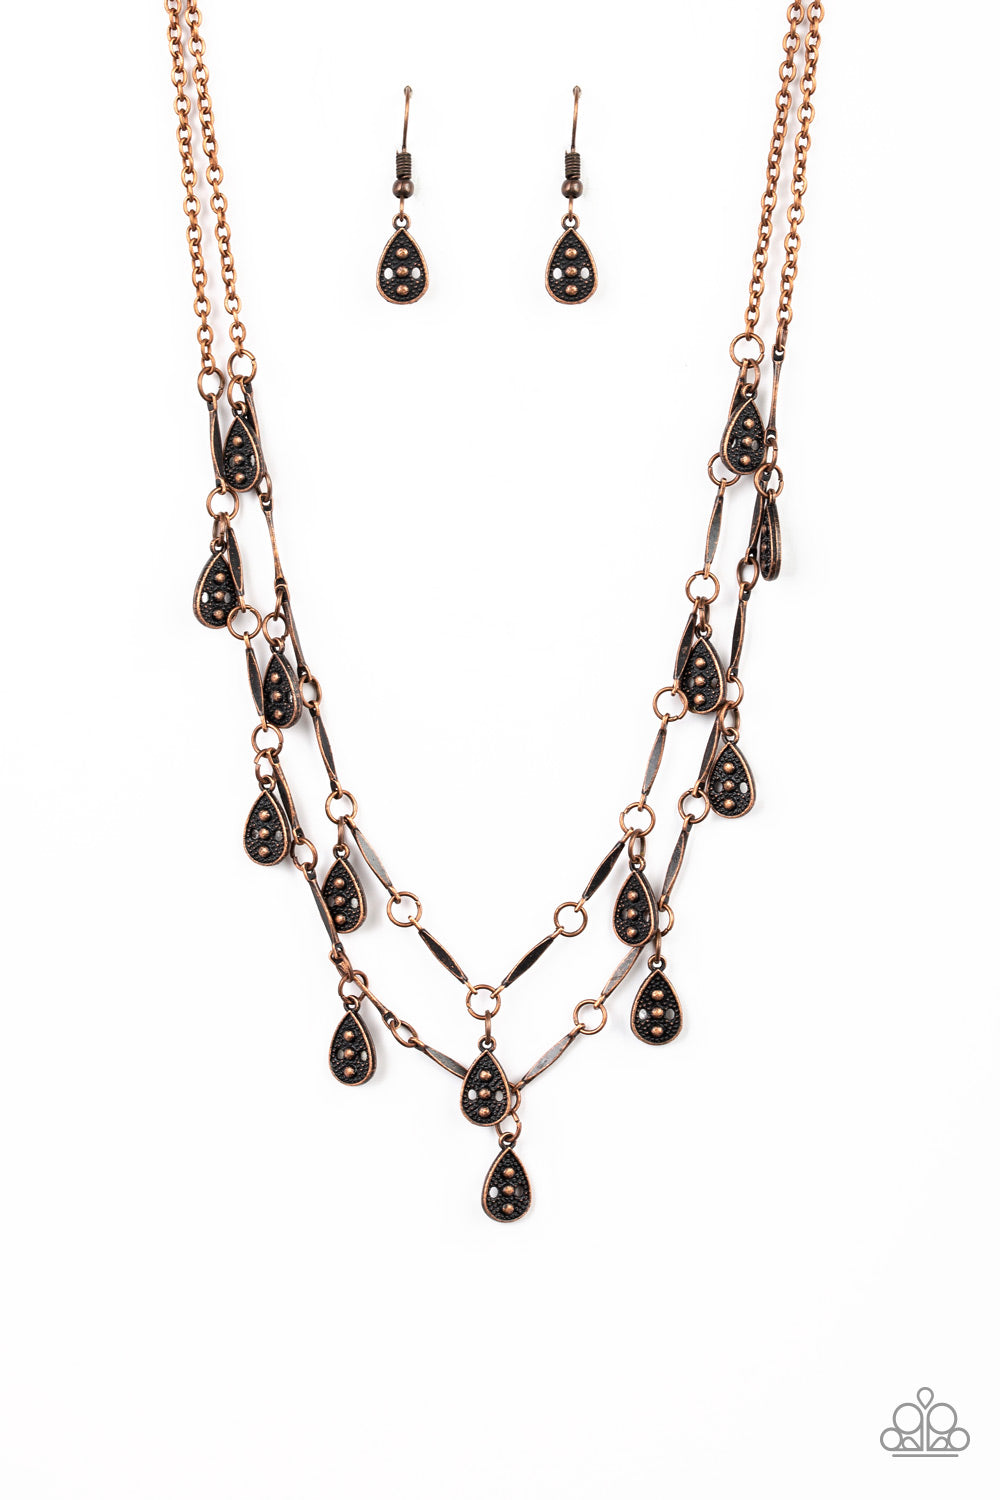 Paparazzi Accessories - Glistening copper rods and ornate teardrops link below the collar in two rows, creating a playful fringe. Features an adjustable clasp closure.